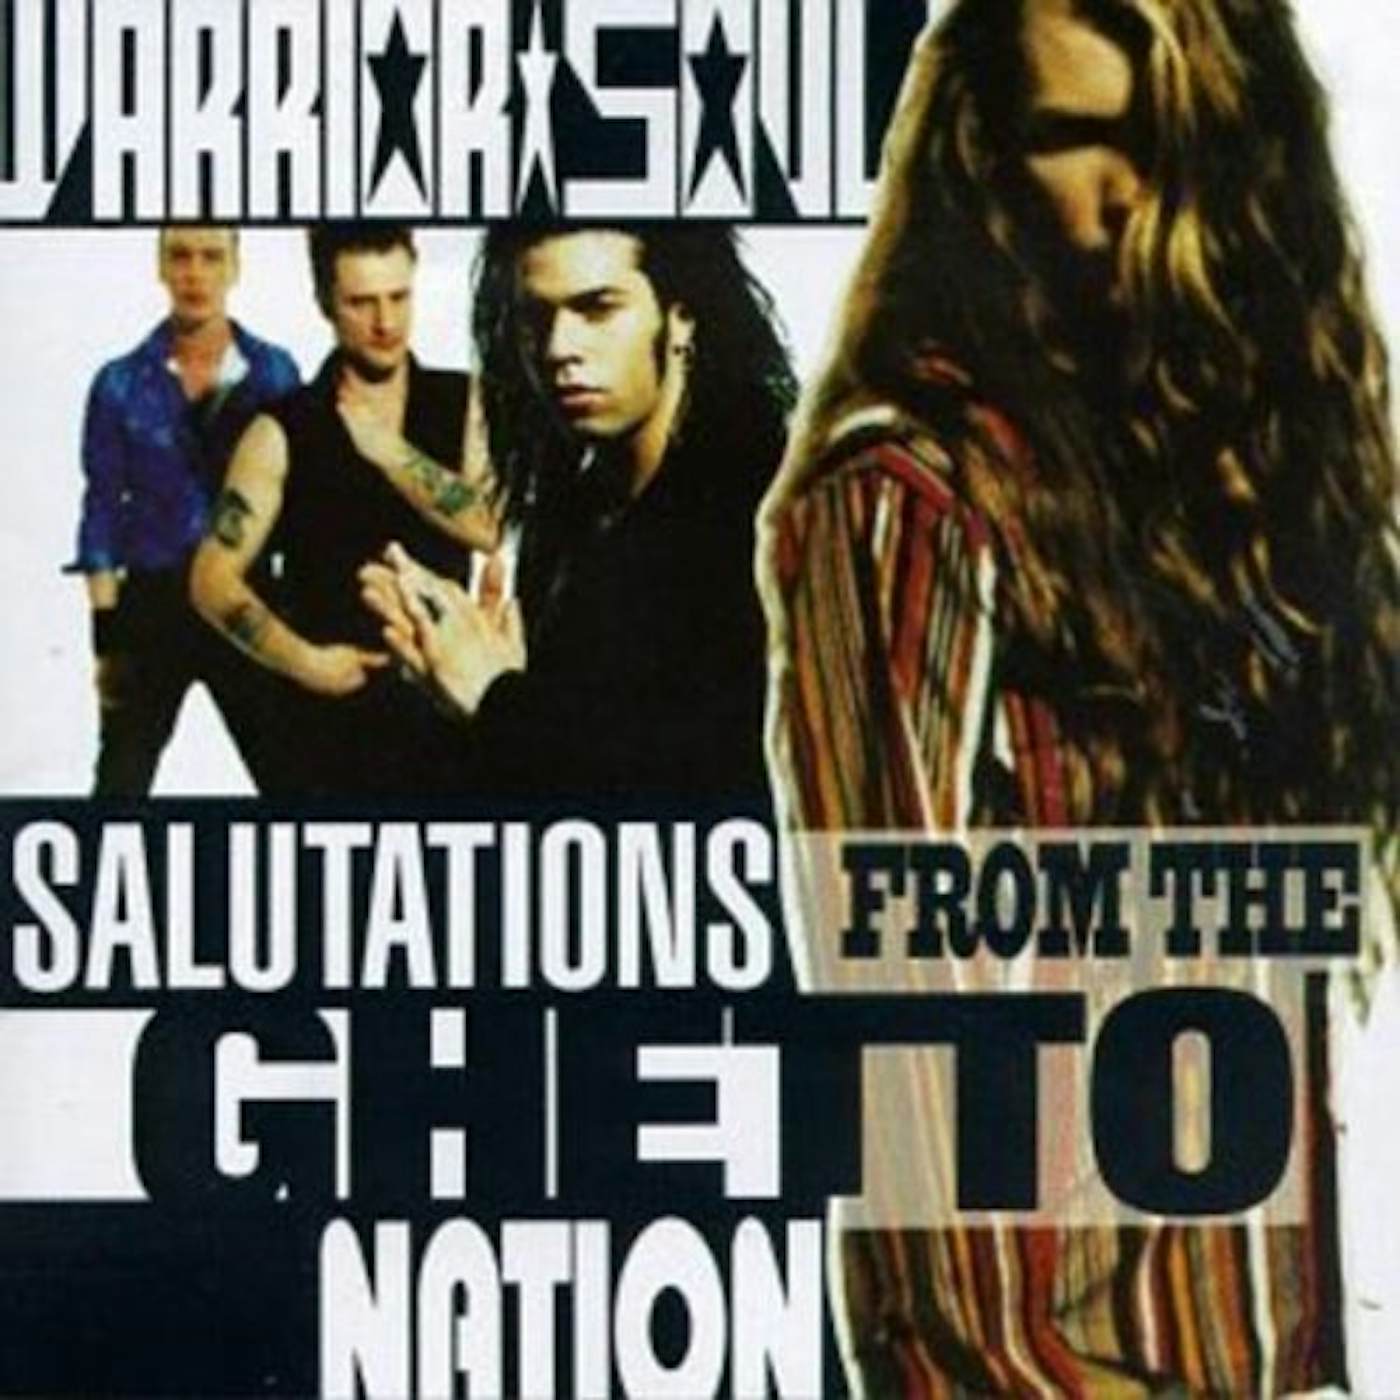 Warrior Soul Salutations From The Ghetto Nation Vinyl Record